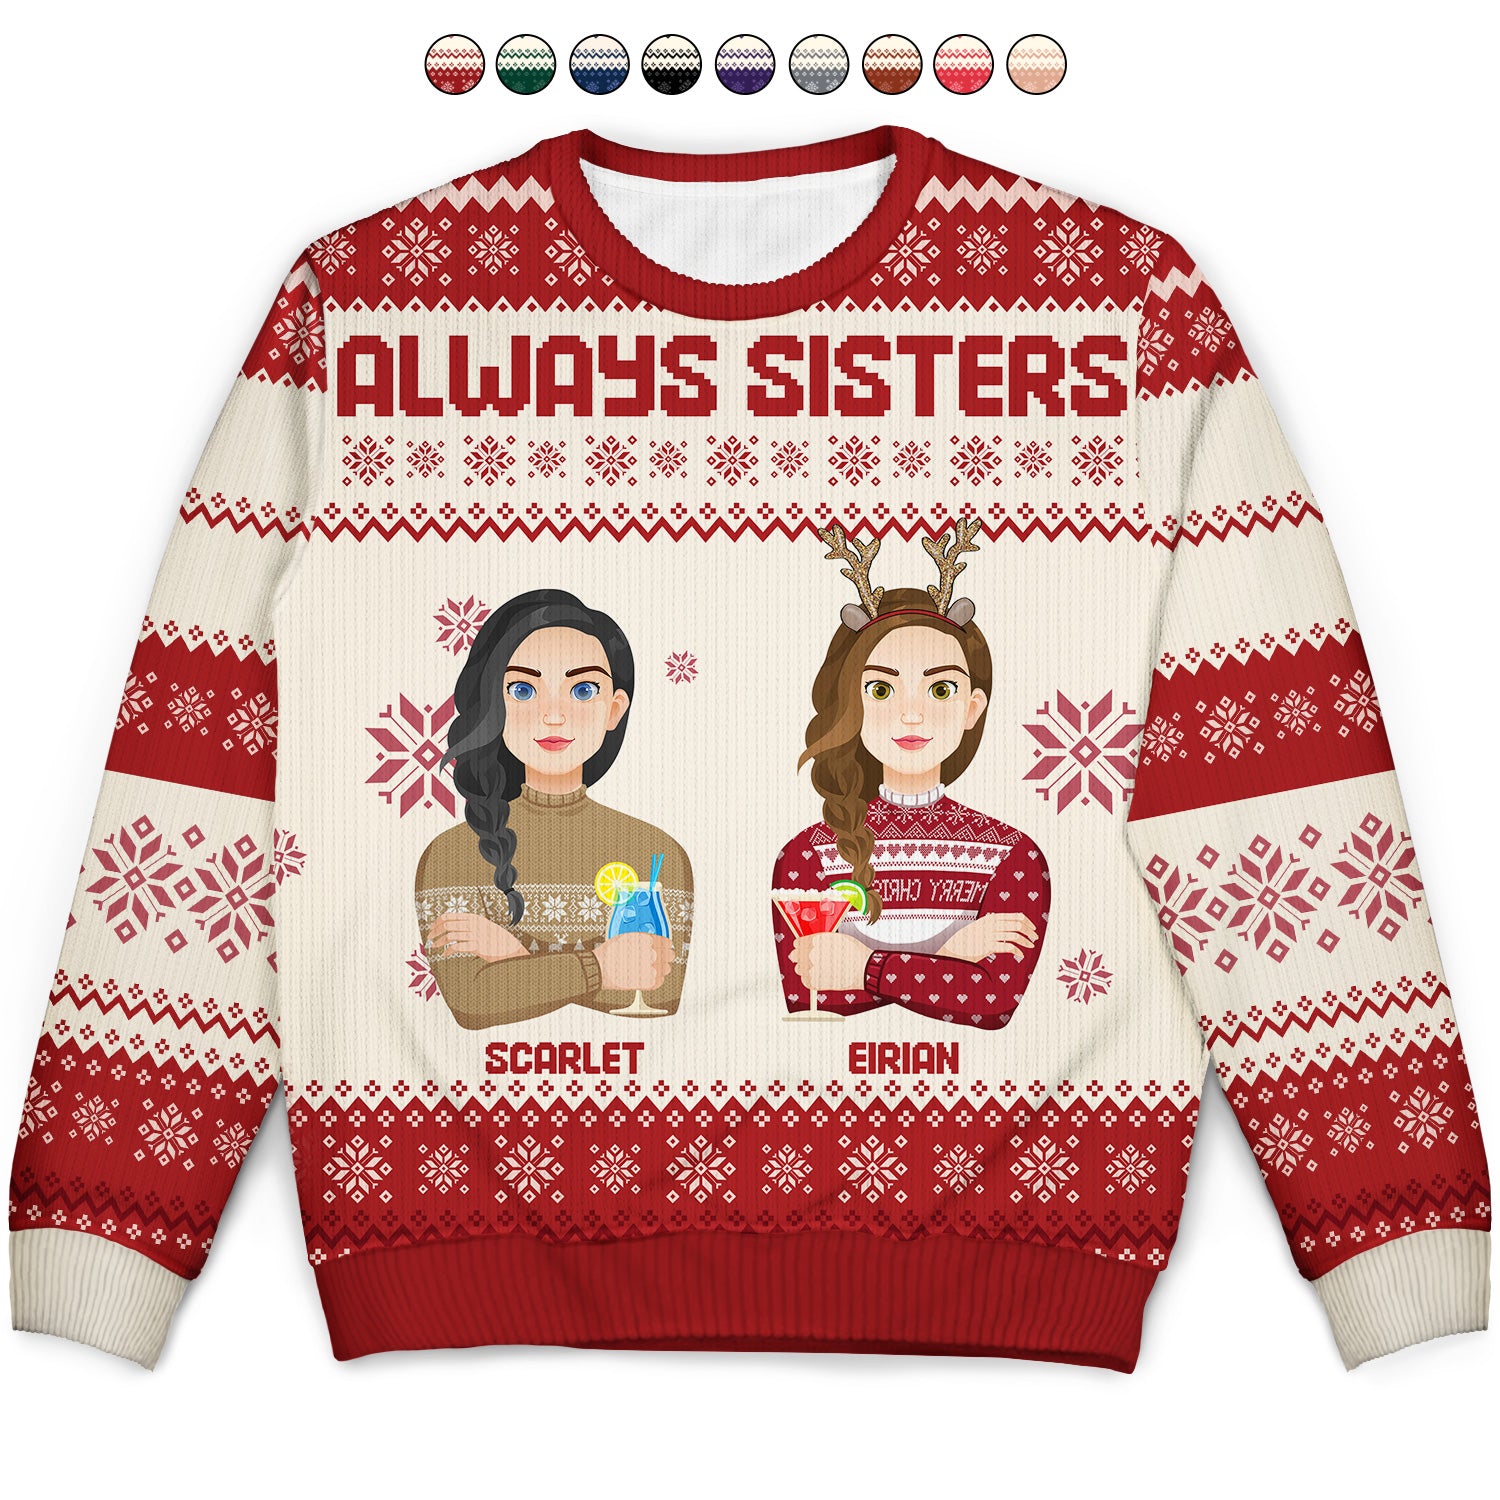 Flat Art - Christmas Gift For Bestie, Friend, Sibling, Family - Personalized Unisex Ugly Sweater